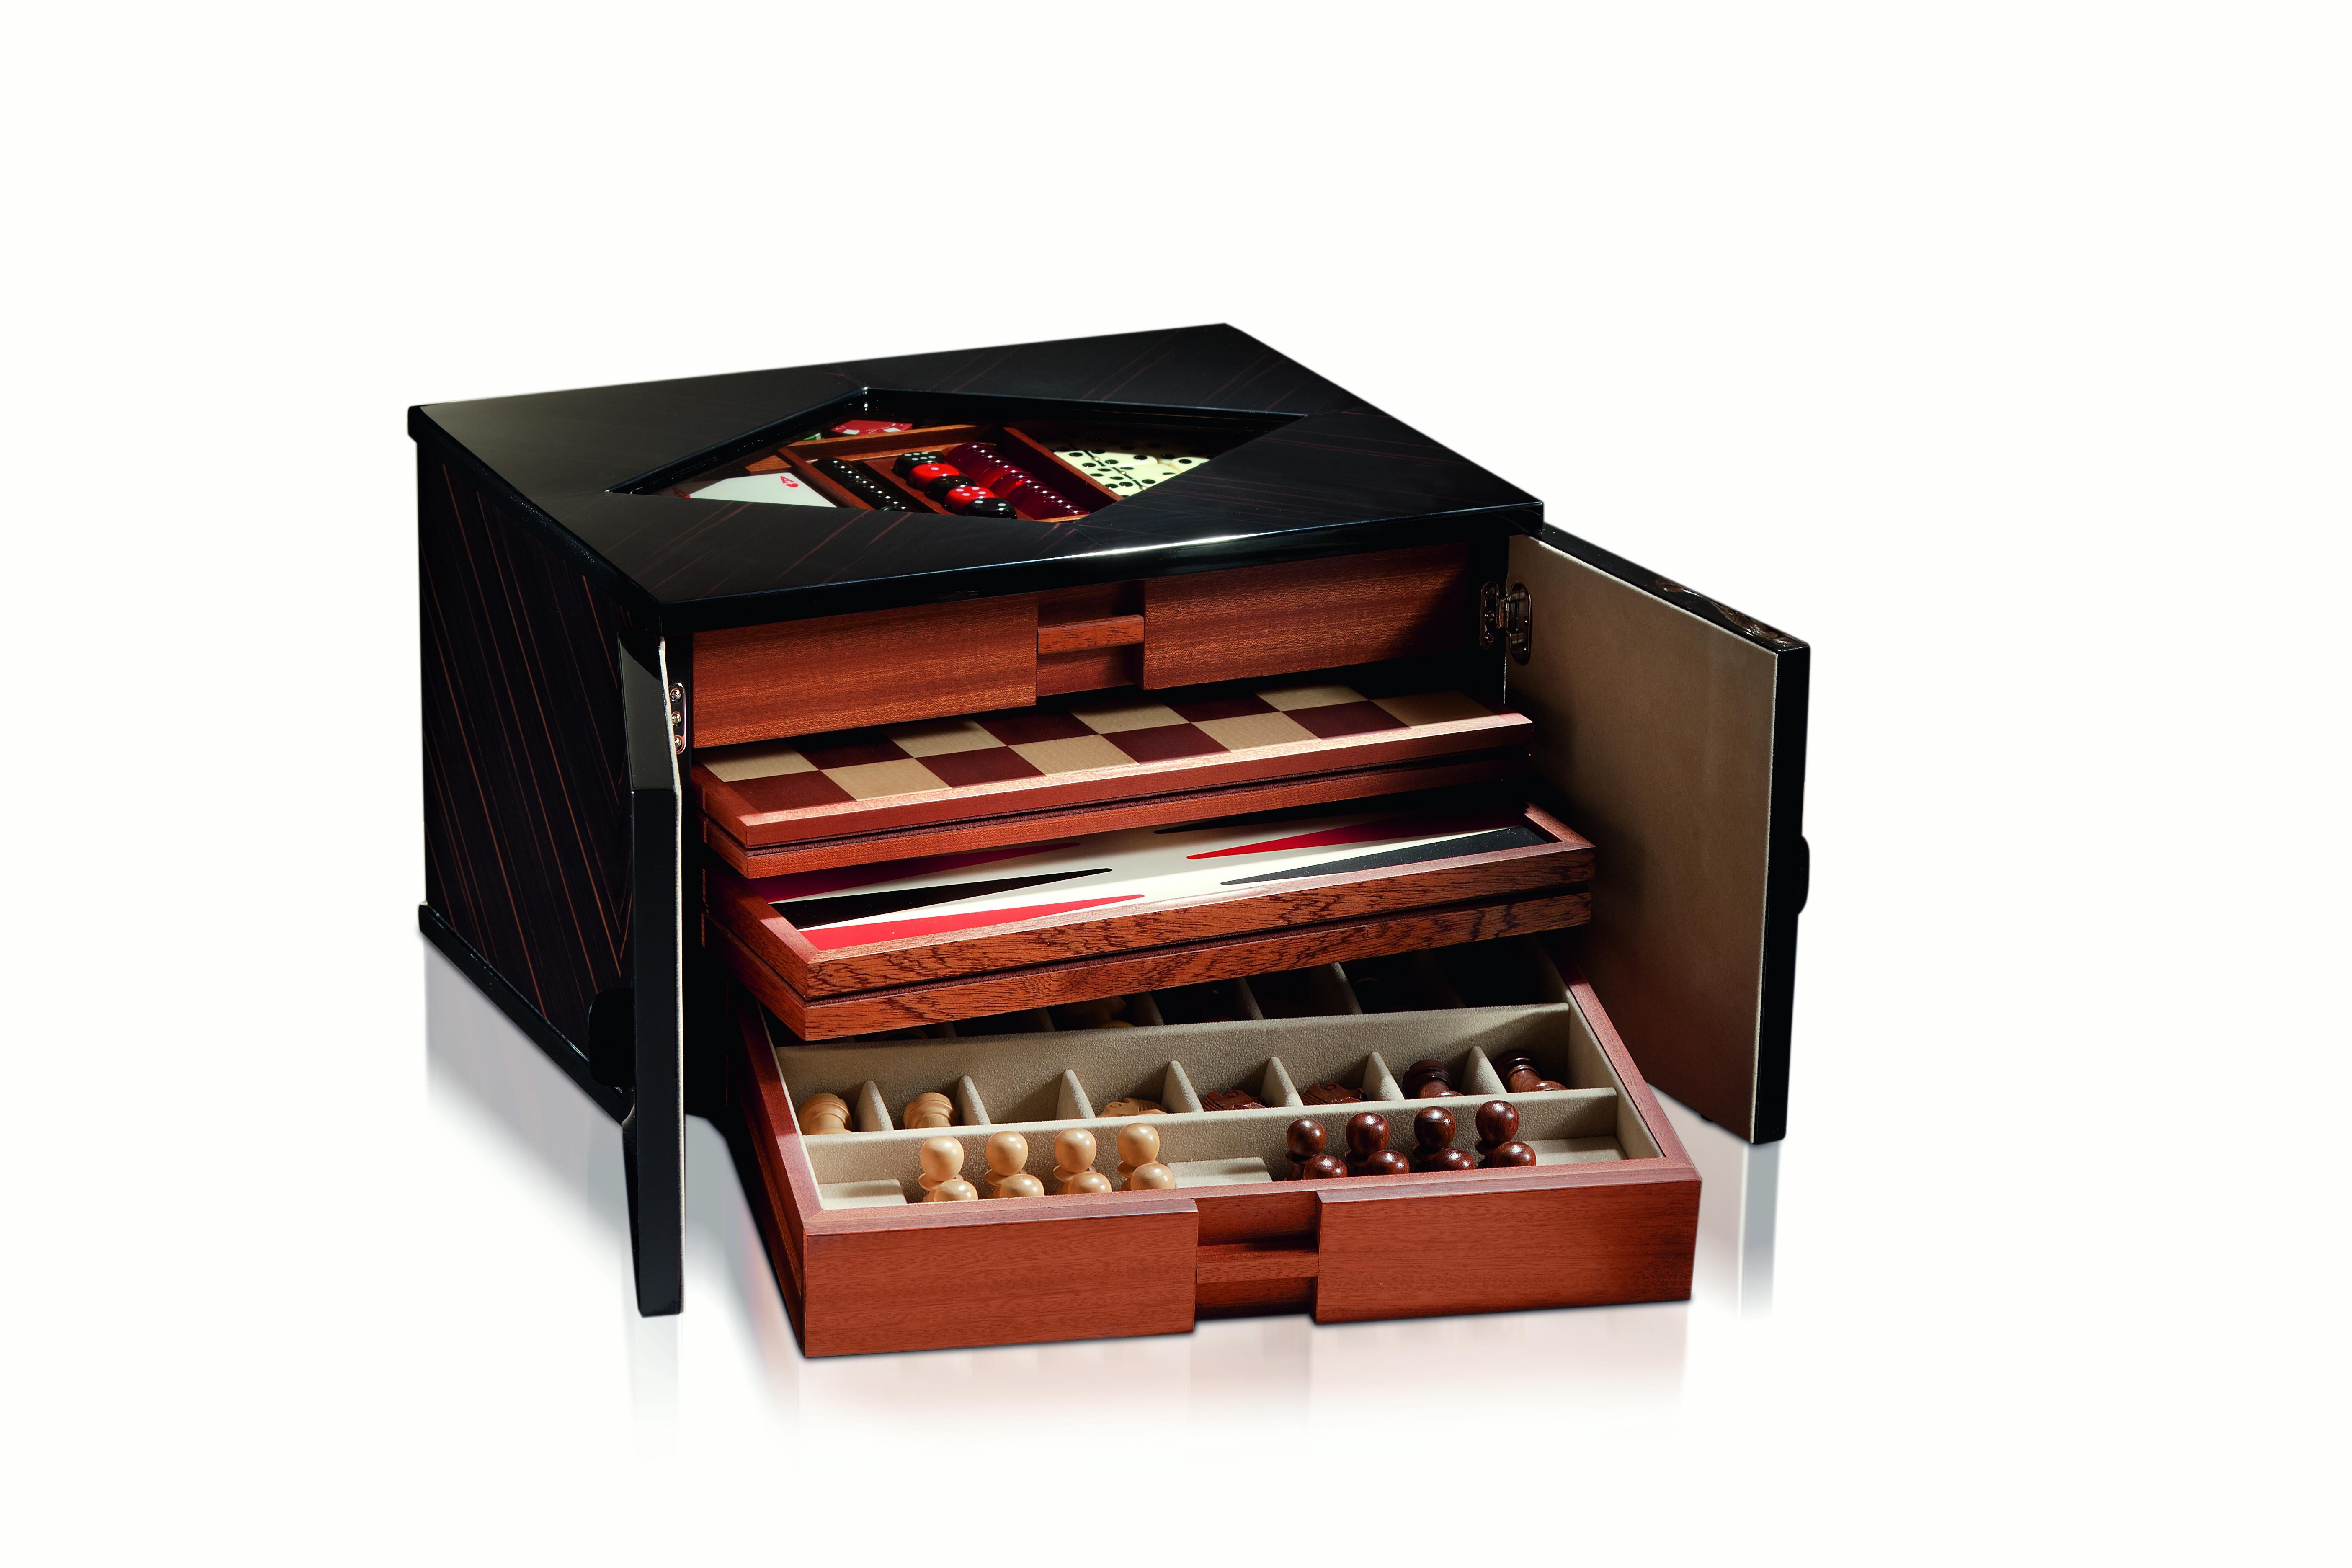 On rainy days or a night with friends, bring Las Vegas to your living room. Our multi-game set features: chess with 8.3 Staunton chessmen, checkers, backgammon, dominoes, cards, poker dice and 170 poker chips. Black polished wood meets a nickel